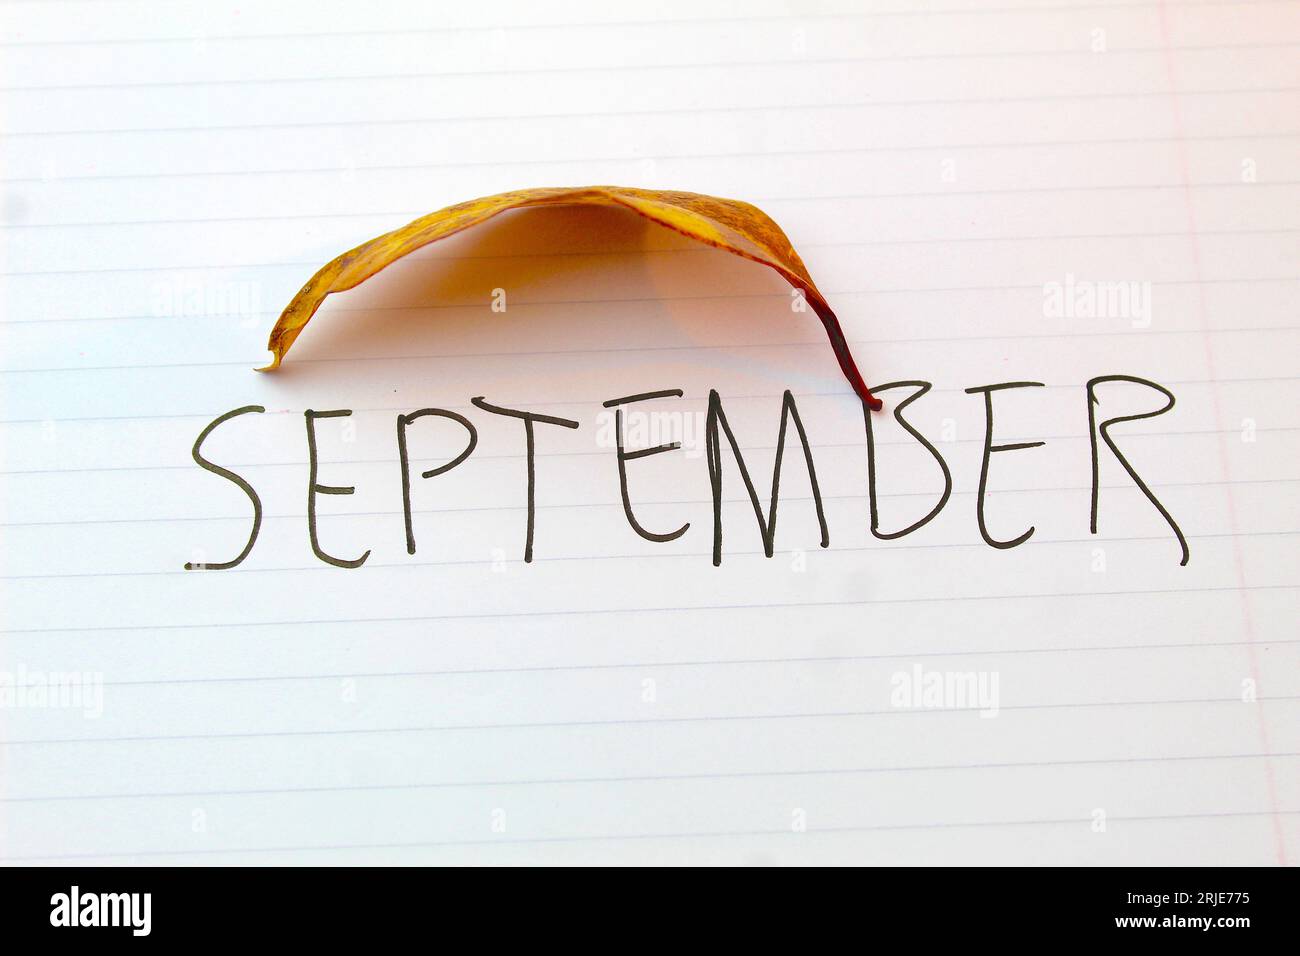 A photo of the month September written on a white lined page with a yellow leaf on it. Stock Photo